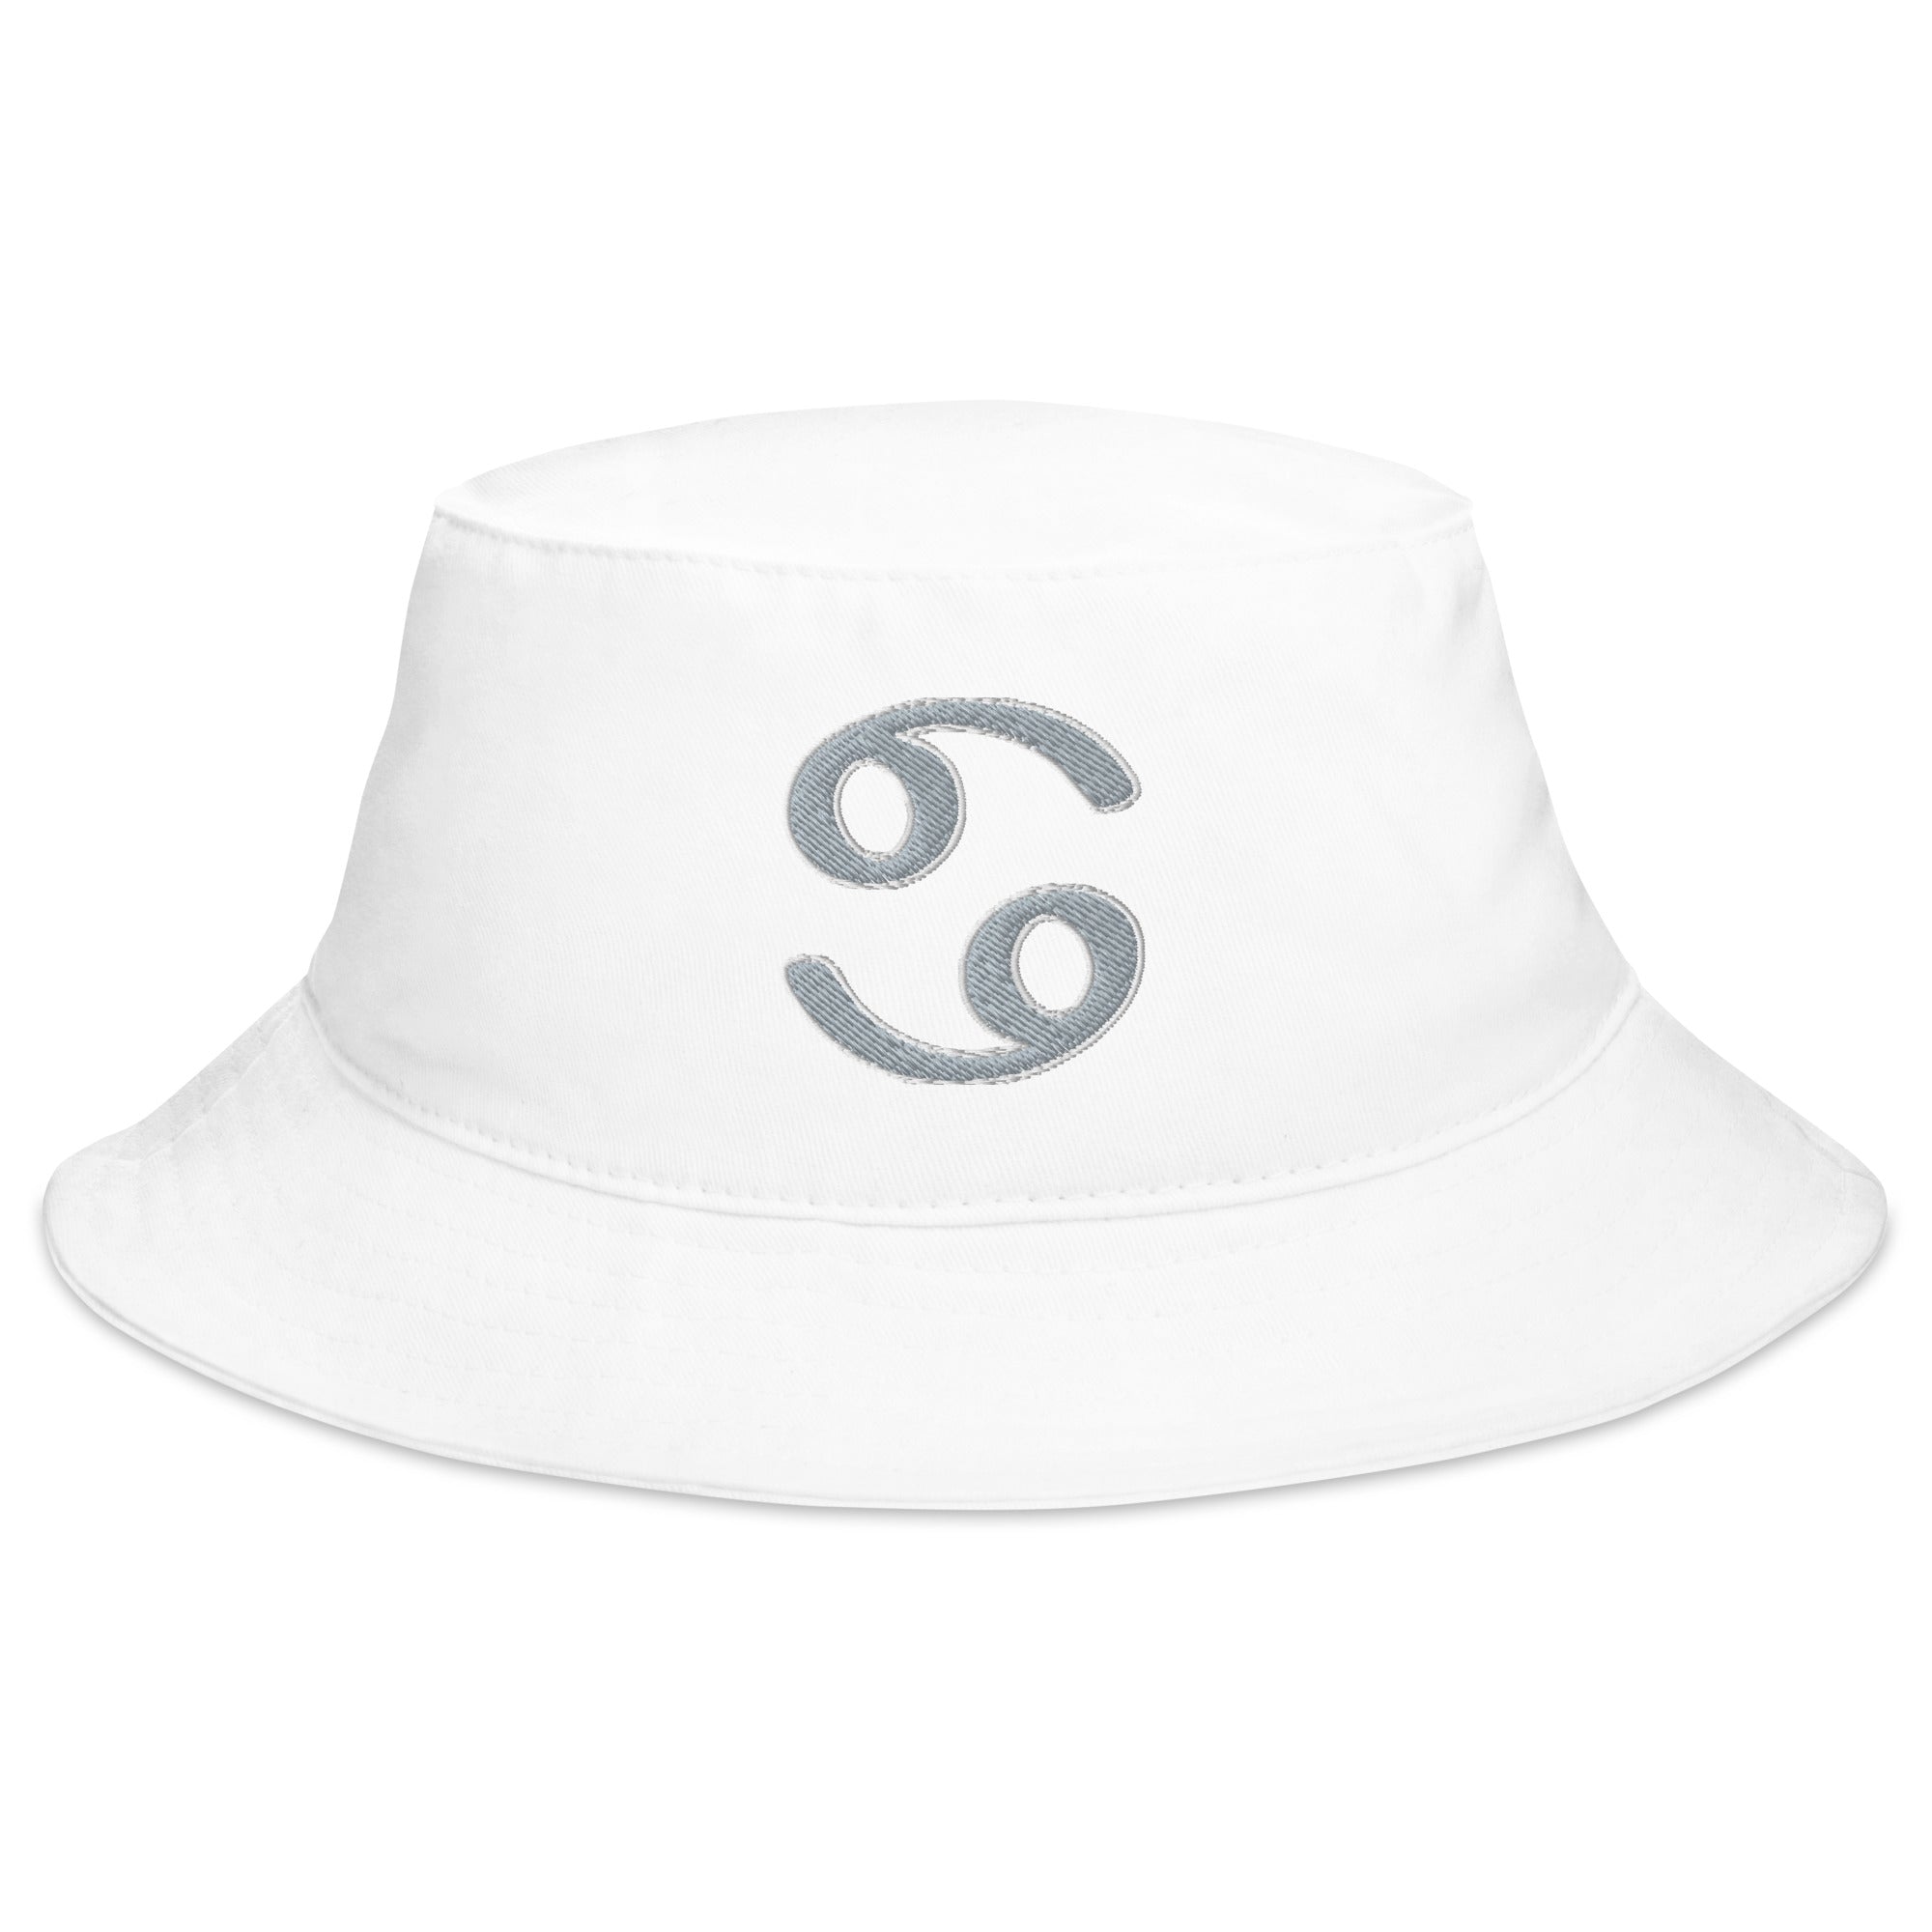 Zodiac Sign Cancer Embroidered Bucket Hat Astrology Horoscope